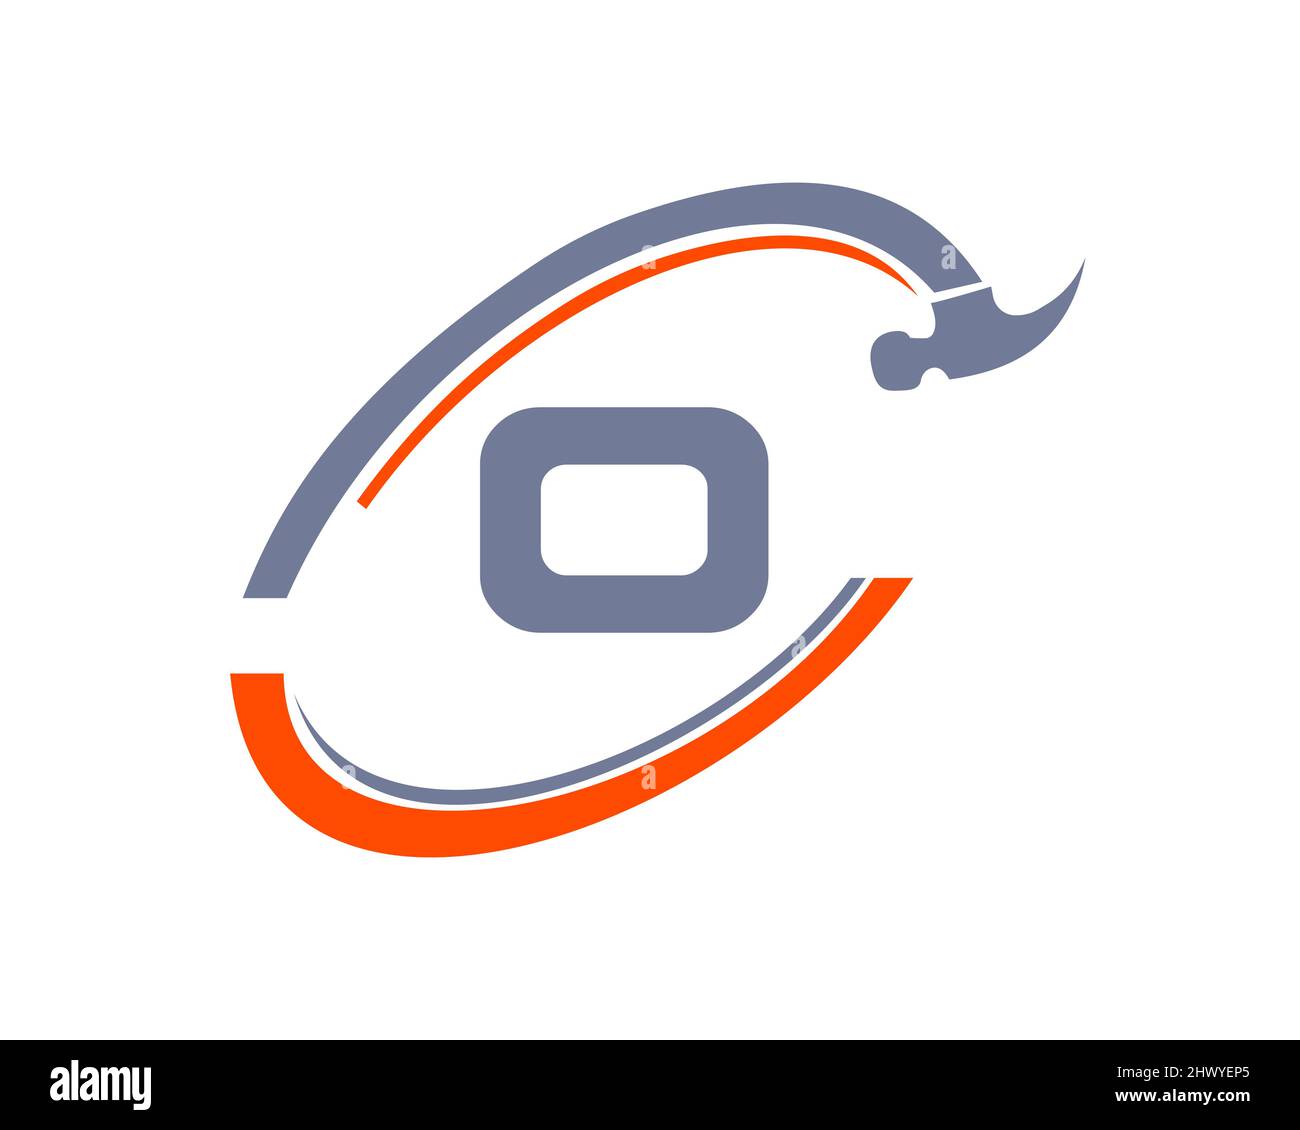 Home Repair logo with O letter vector. Home Construction Logo with O letter repair concept Stock Vector